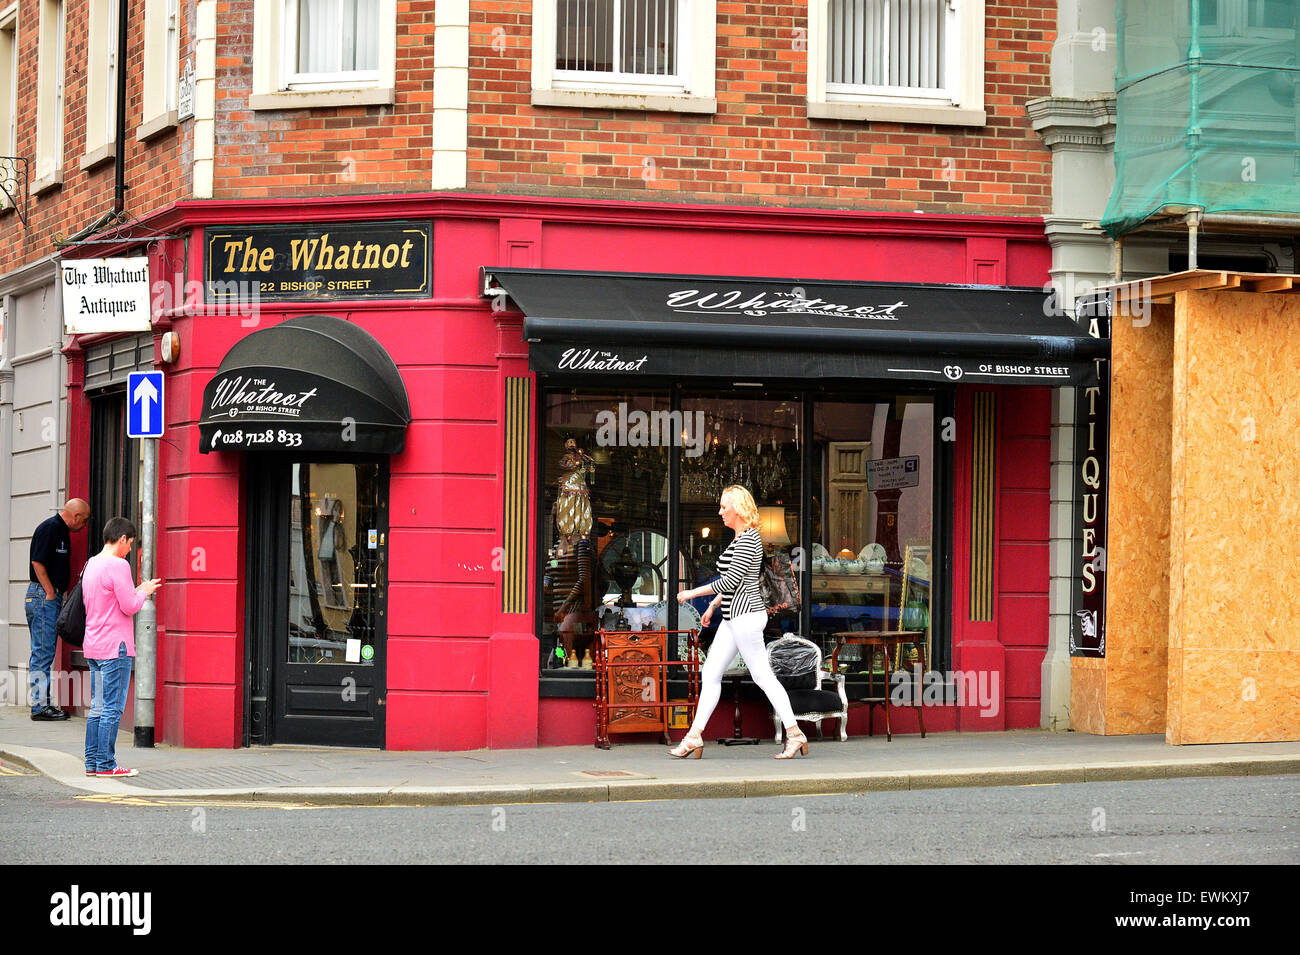 The Whatnot antique shop in Bishop Street, Londonderry (Derry), Northern Ireland. Stock Photo